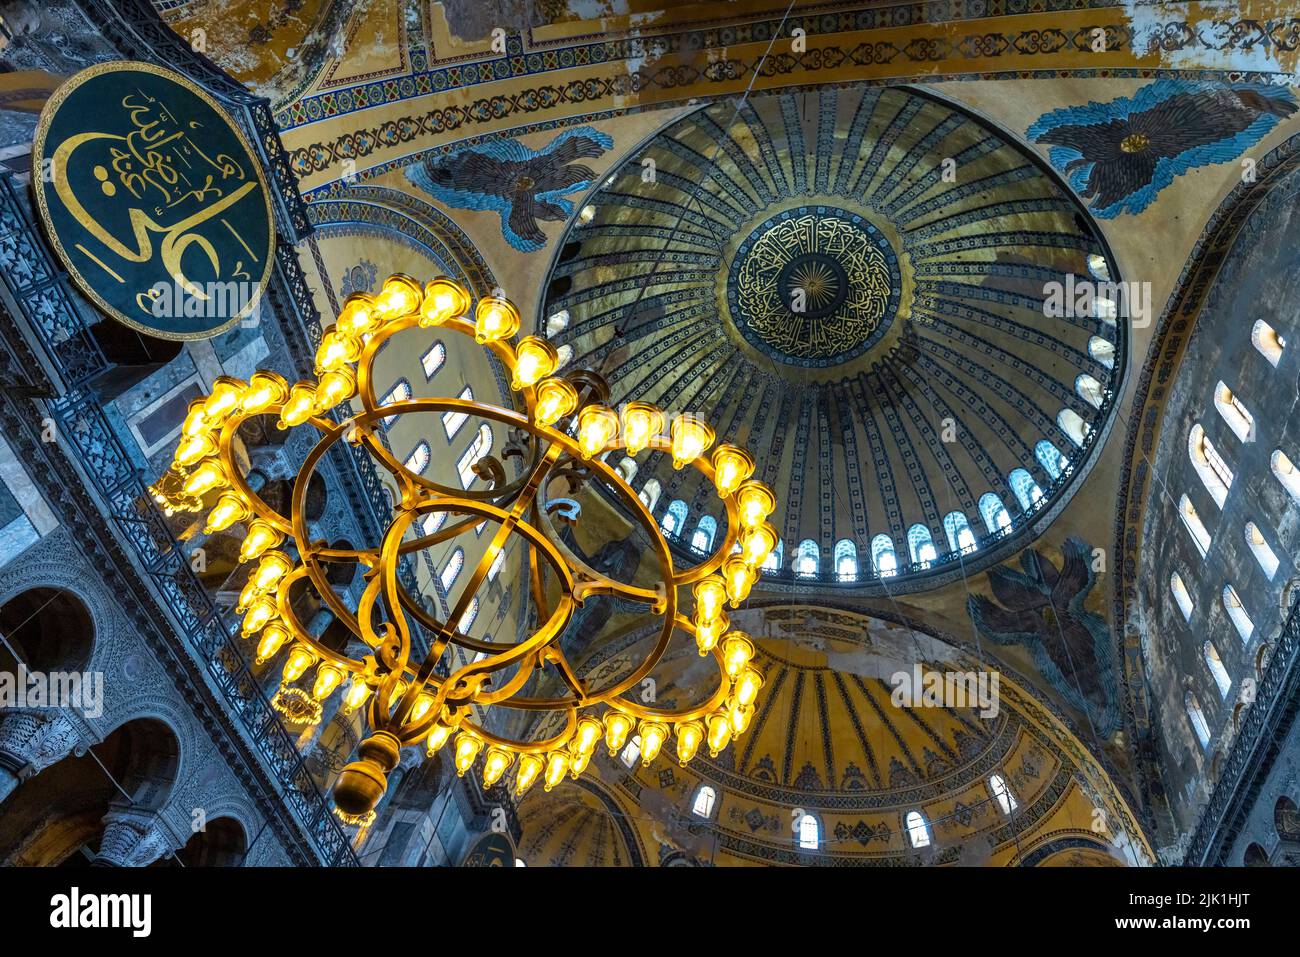 detail of the candelabrum and the ceiling of the hagia sophia mosque in istanbulì Stock Photo